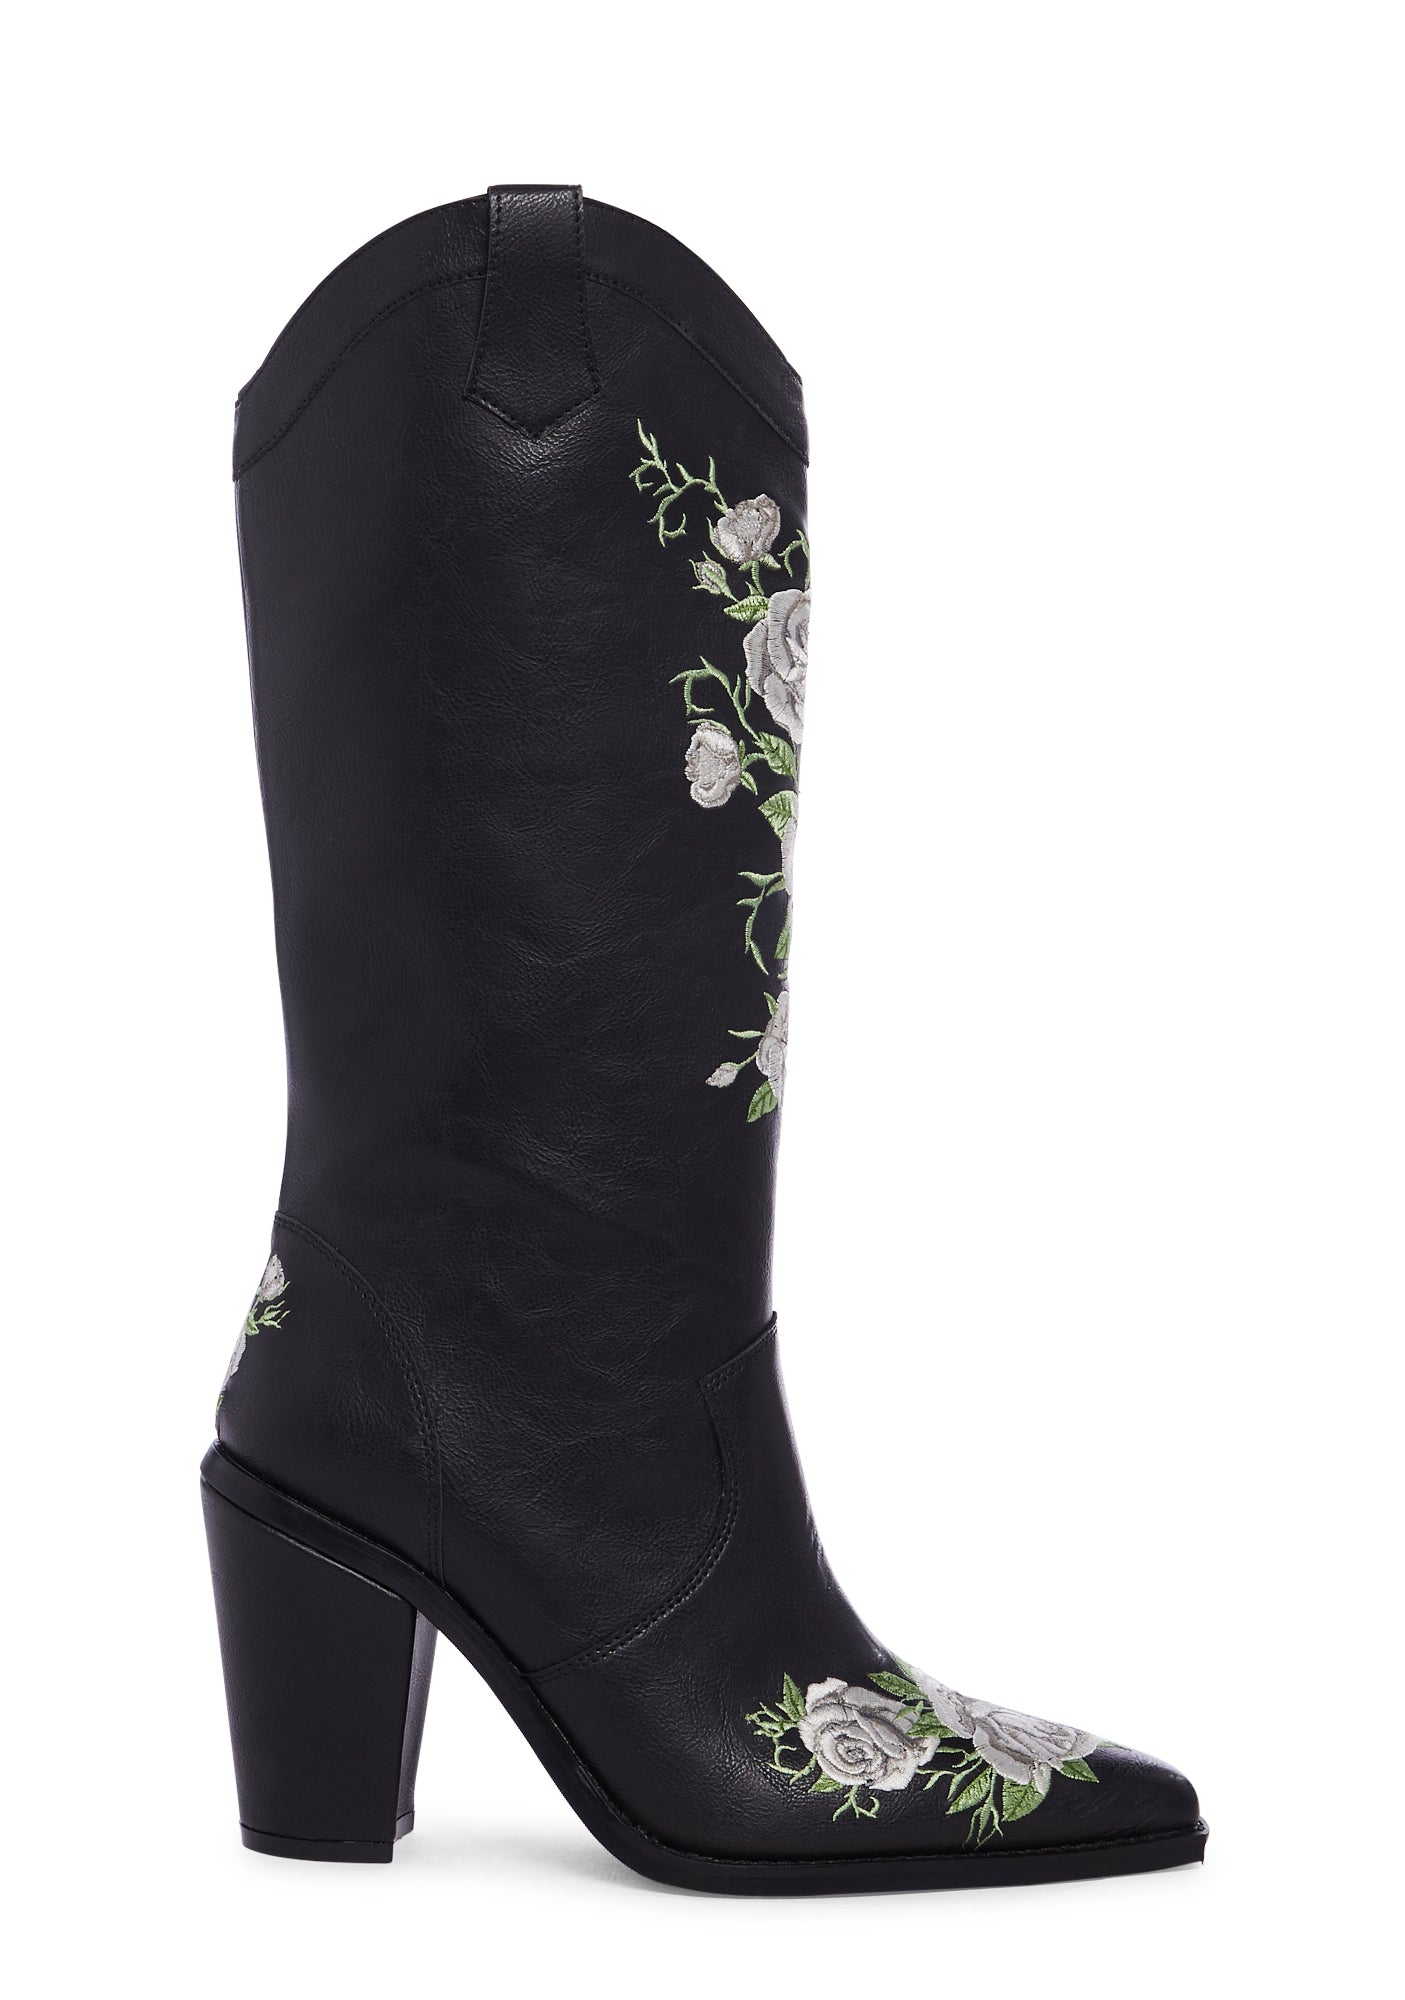 Widow Embroidered Floral Rose Cowboy Boots - Black